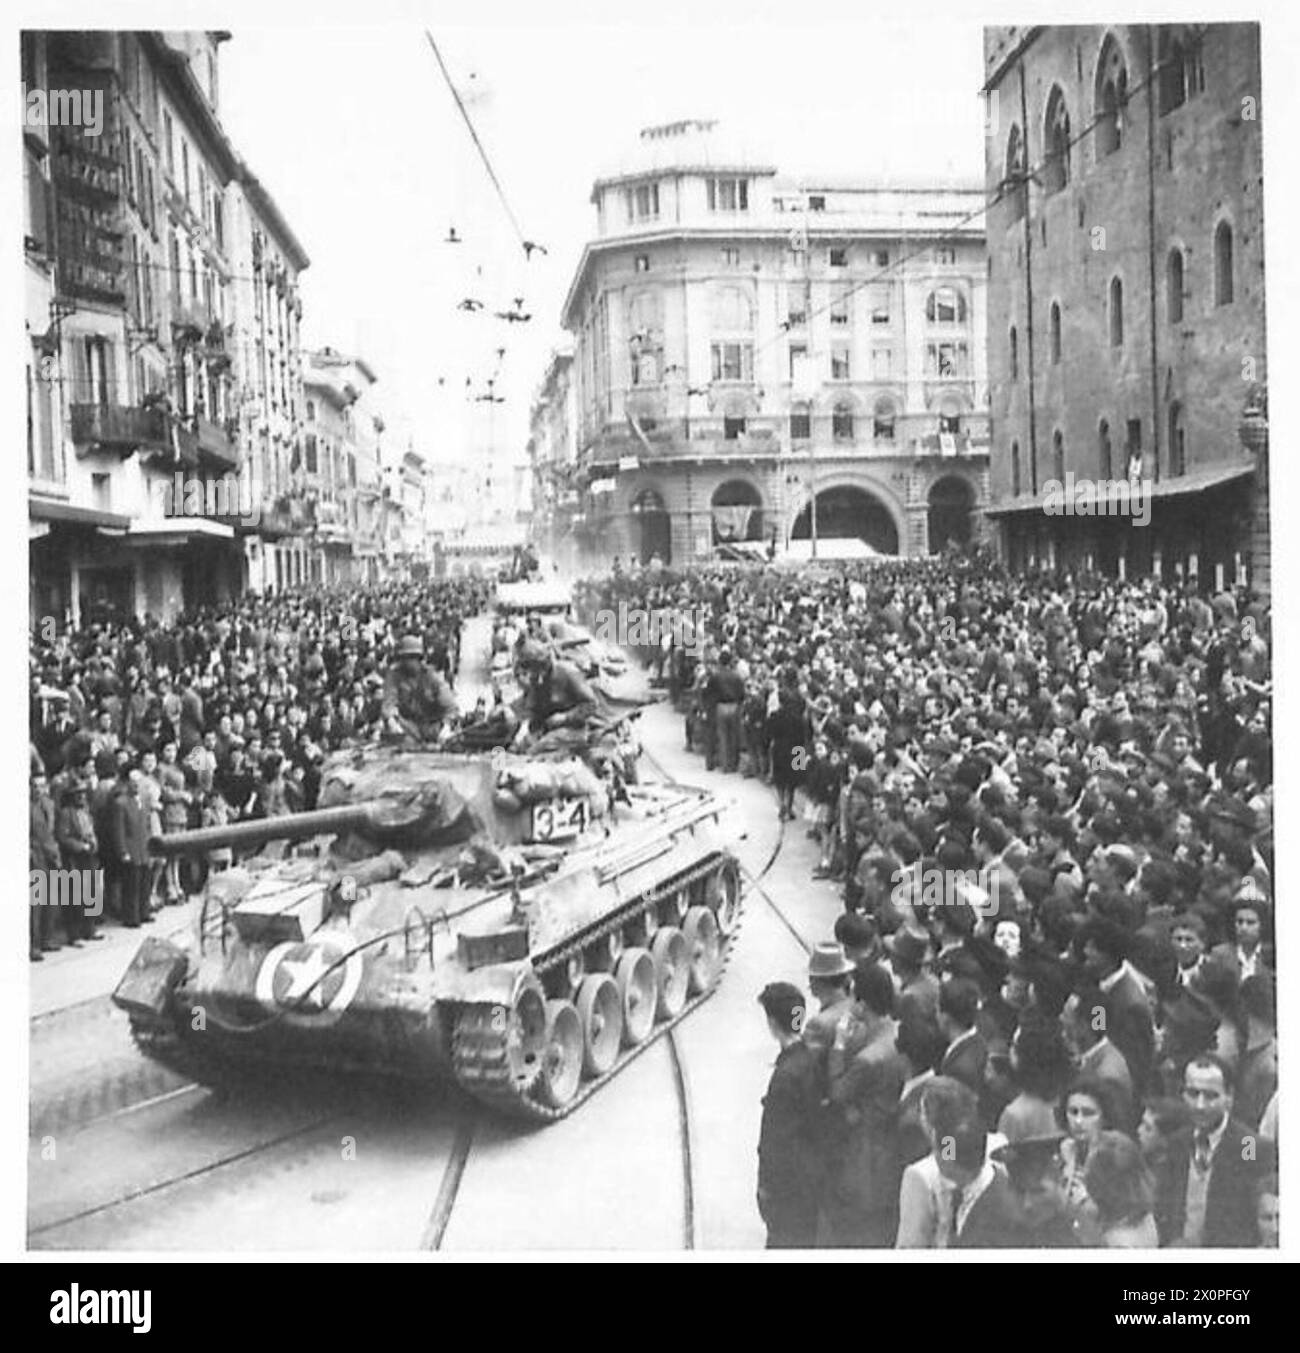 BOLOGNA : VARIOUS - Huge crowds of Bolognese citizens clap and cheer as armour passes through the streets. Photographic negative , British Army Stock Photo